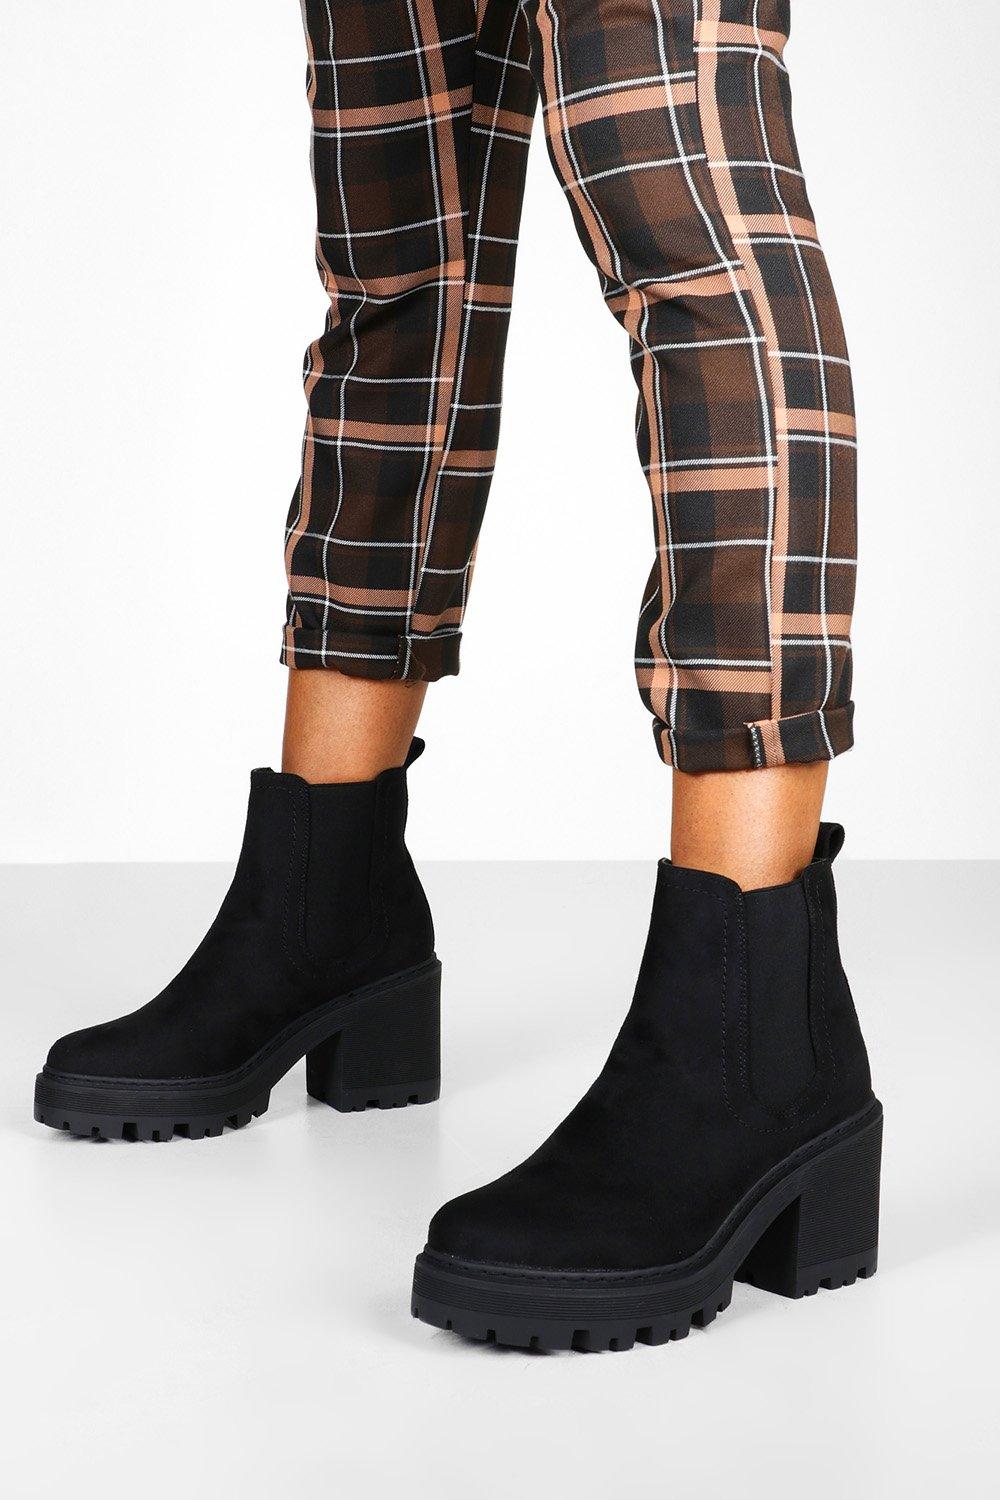 riding boots with skirt